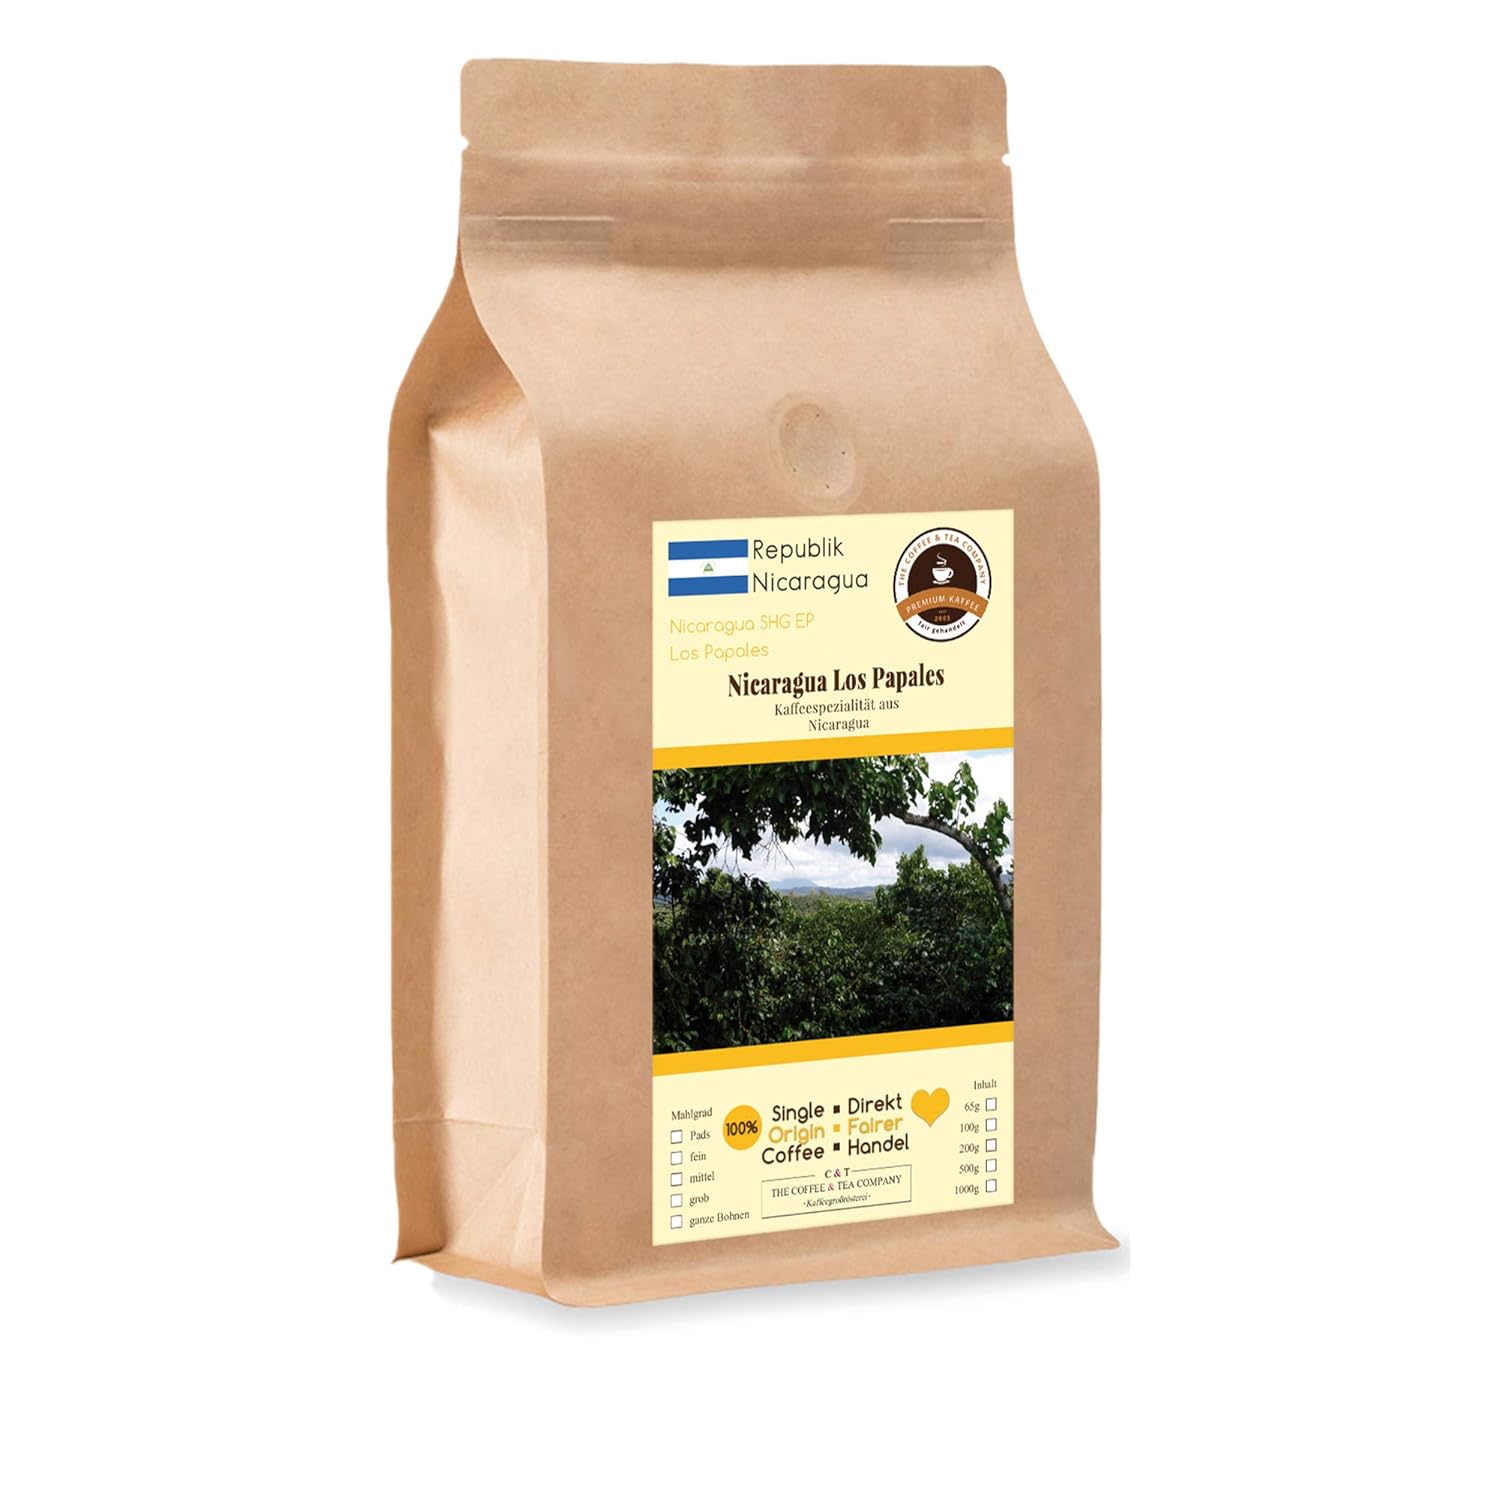 Coffee Globetrotter - Coffee with Heart - Nicaragua Los Papales - 1000 g Very Fine Ground - for Portafilter Machine, Sieving Machine - Top Coffee Fair Trade Supports Social Projects